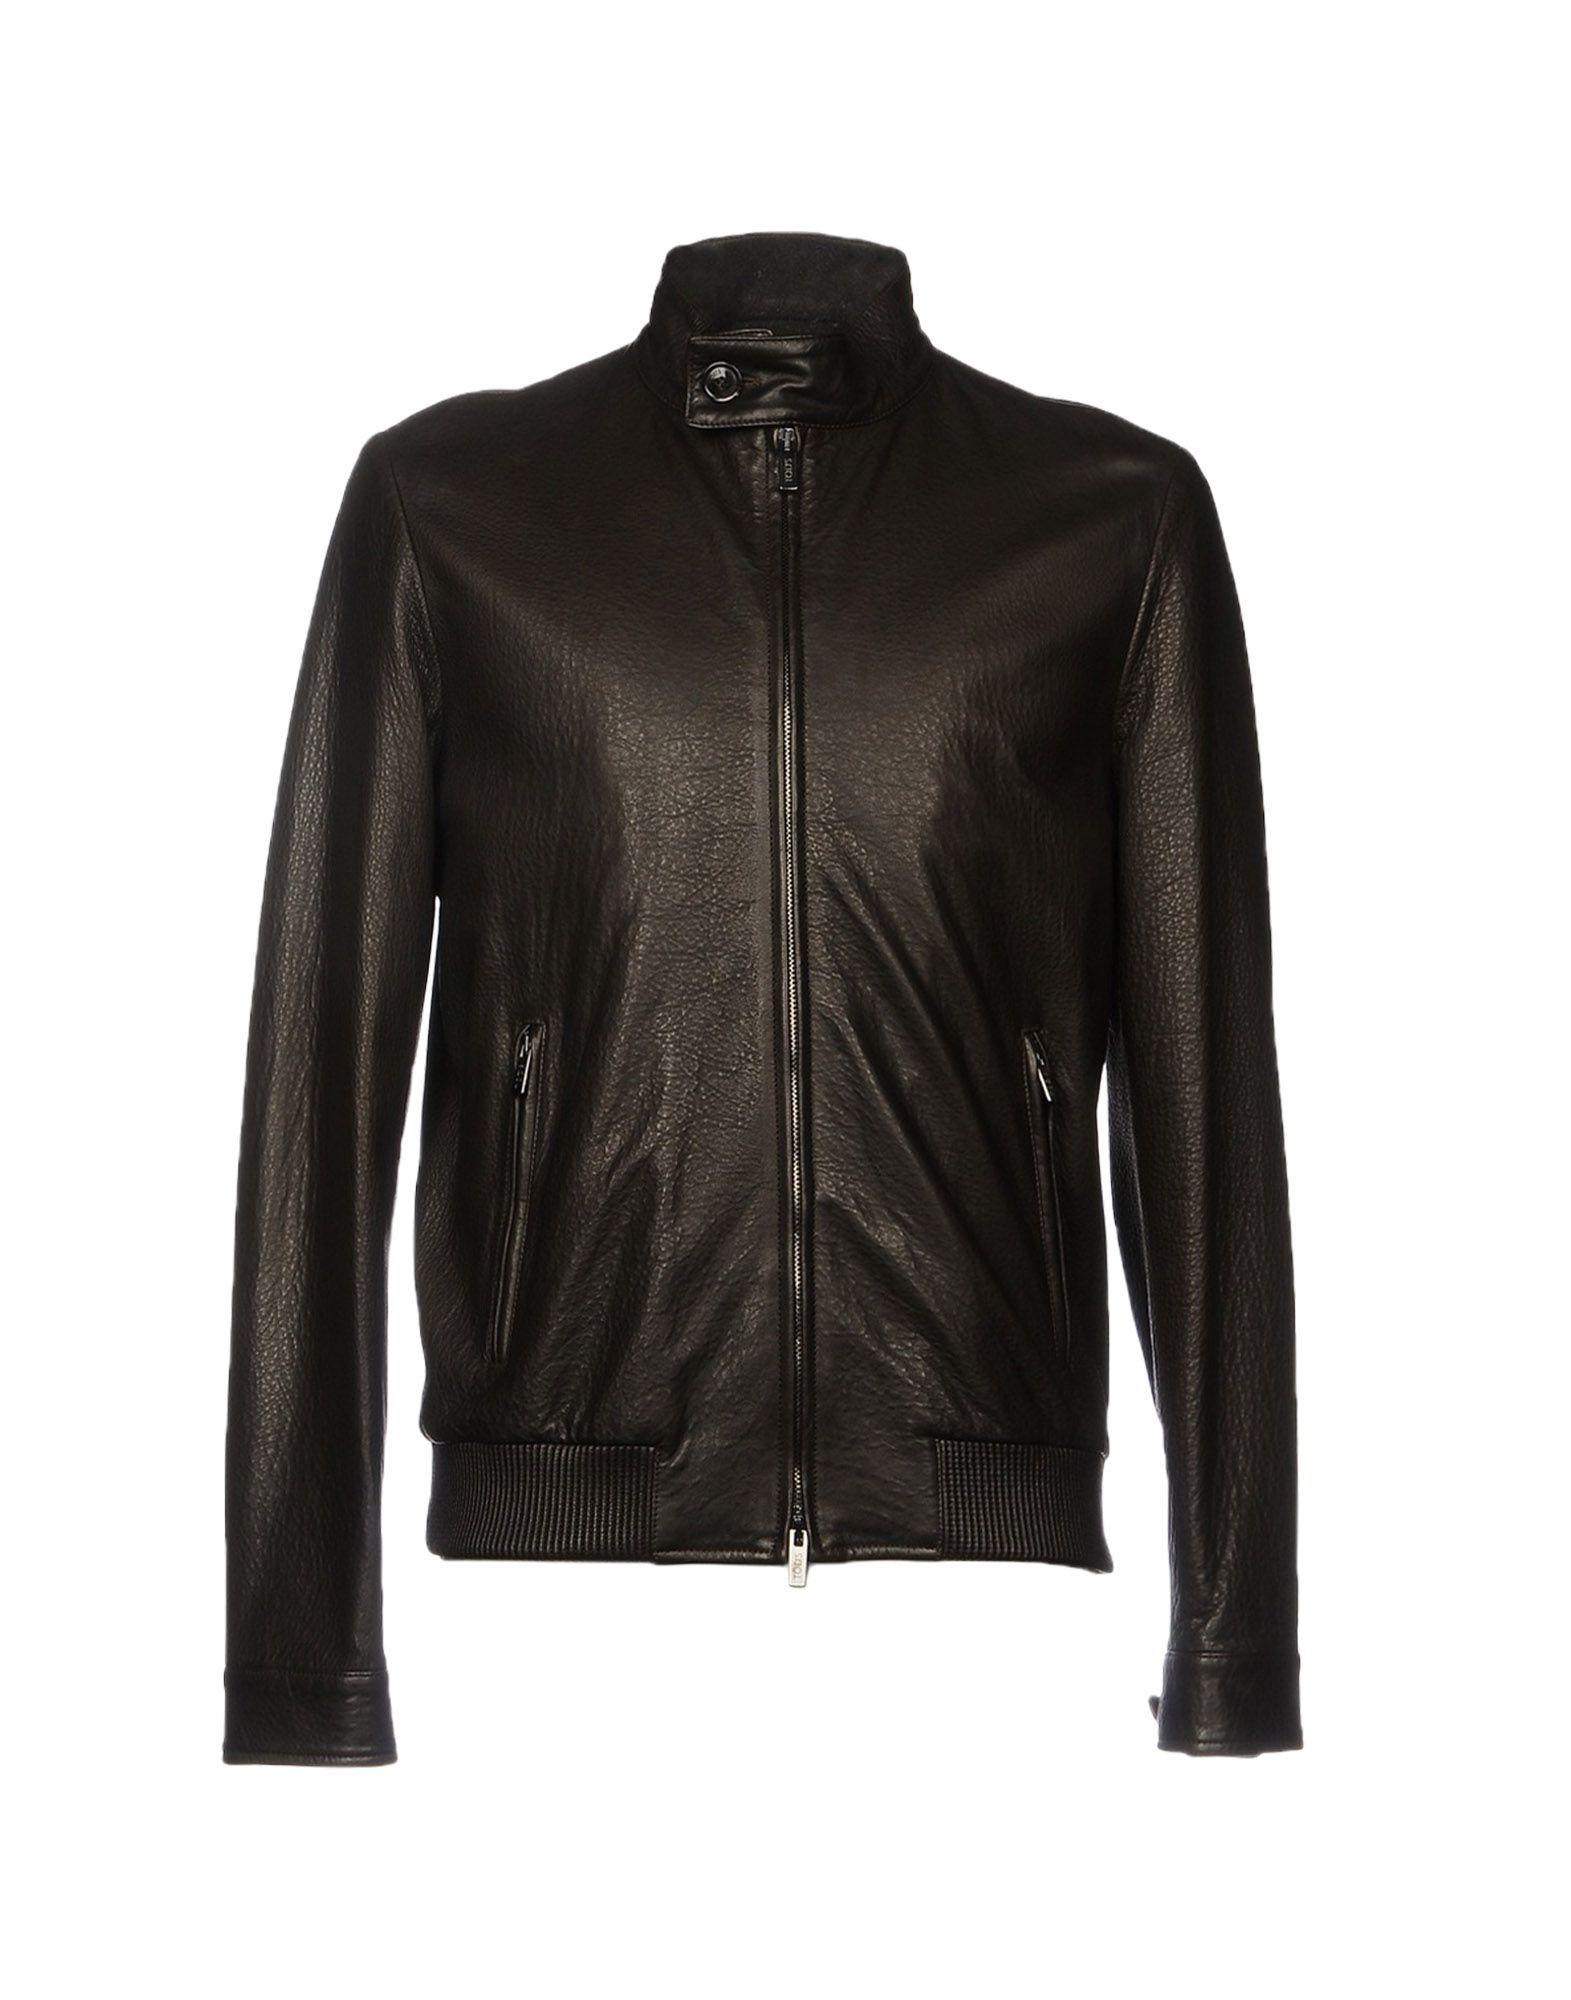 Tod's Leather Jacket in Dark Brown (Brown) for Men - Lyst